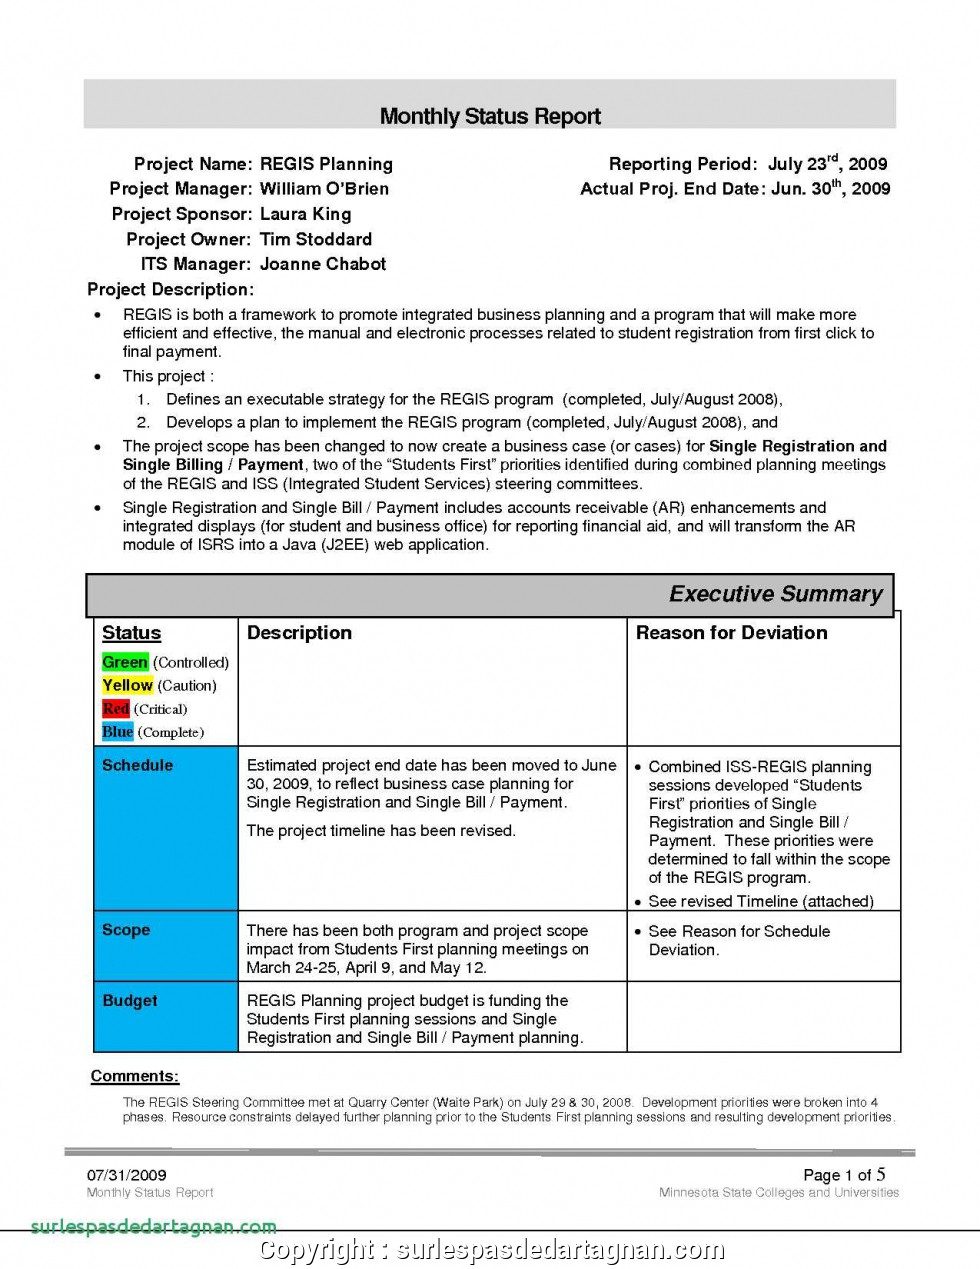 Sales Manager Monthly Report Templates - Atlantaauctionco Regarding Sales Manager Monthly Report Templates